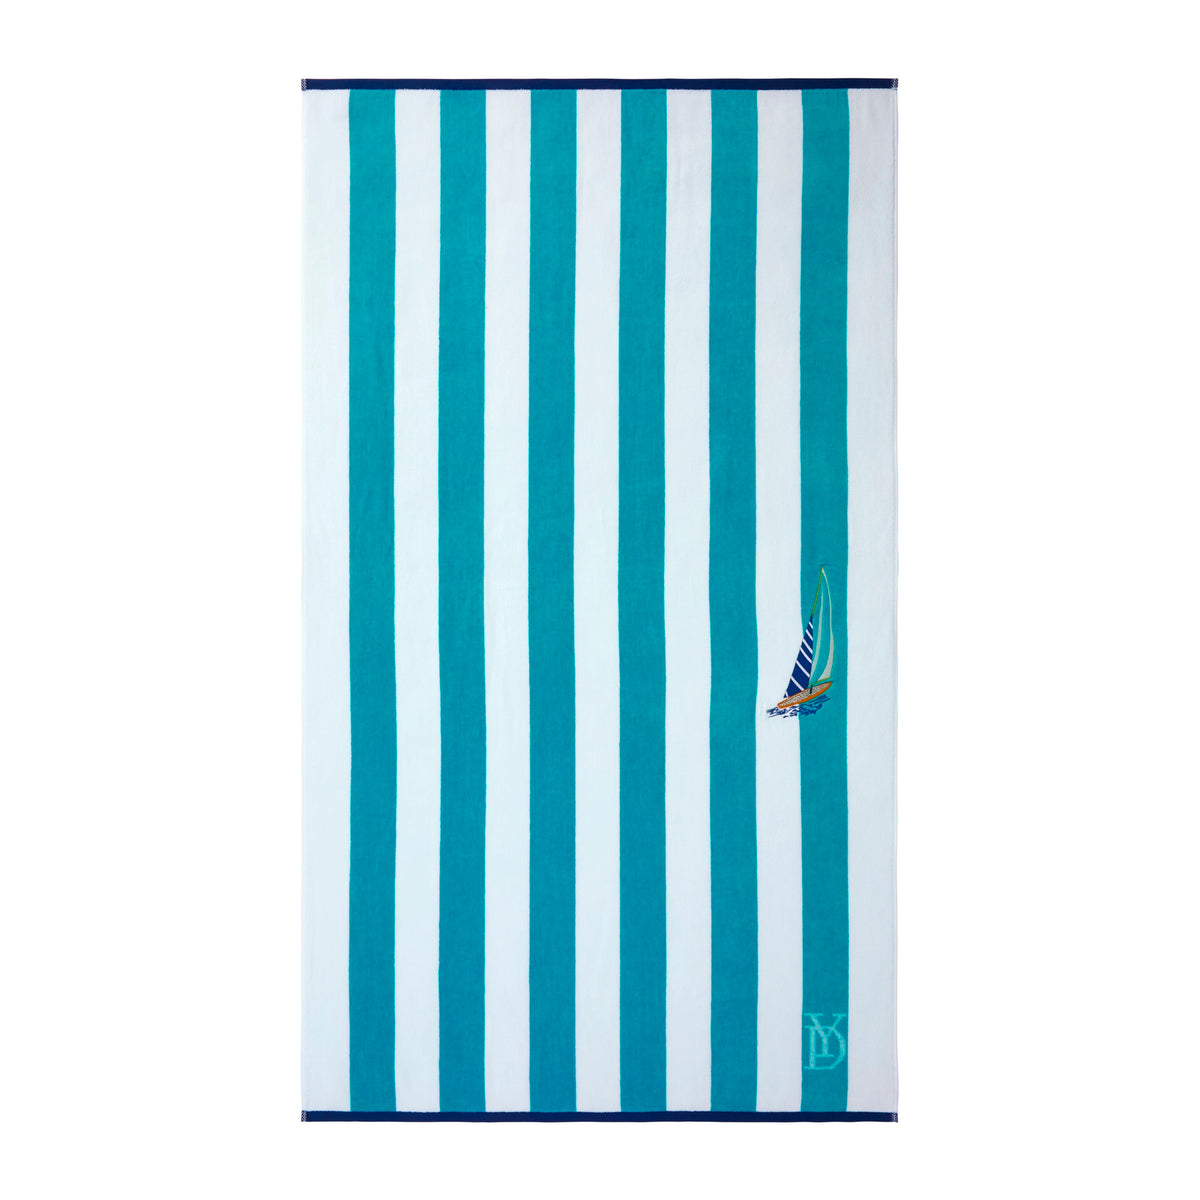 Front View of Yves Delorme Sailing Beach Towel